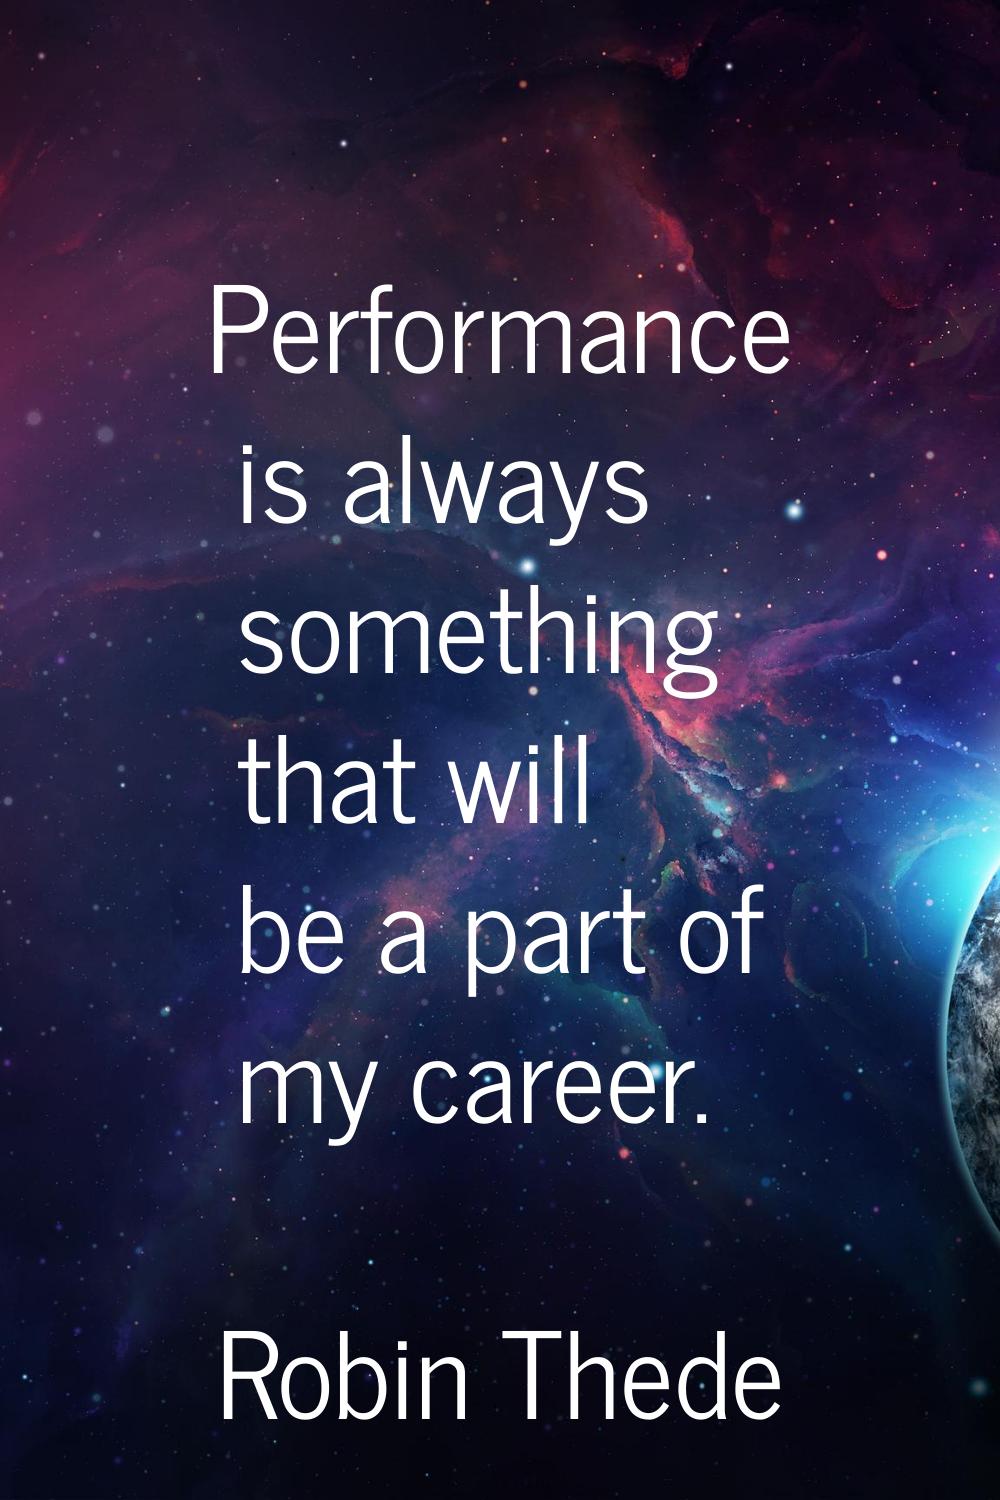 Performance is always something that will be a part of my career.